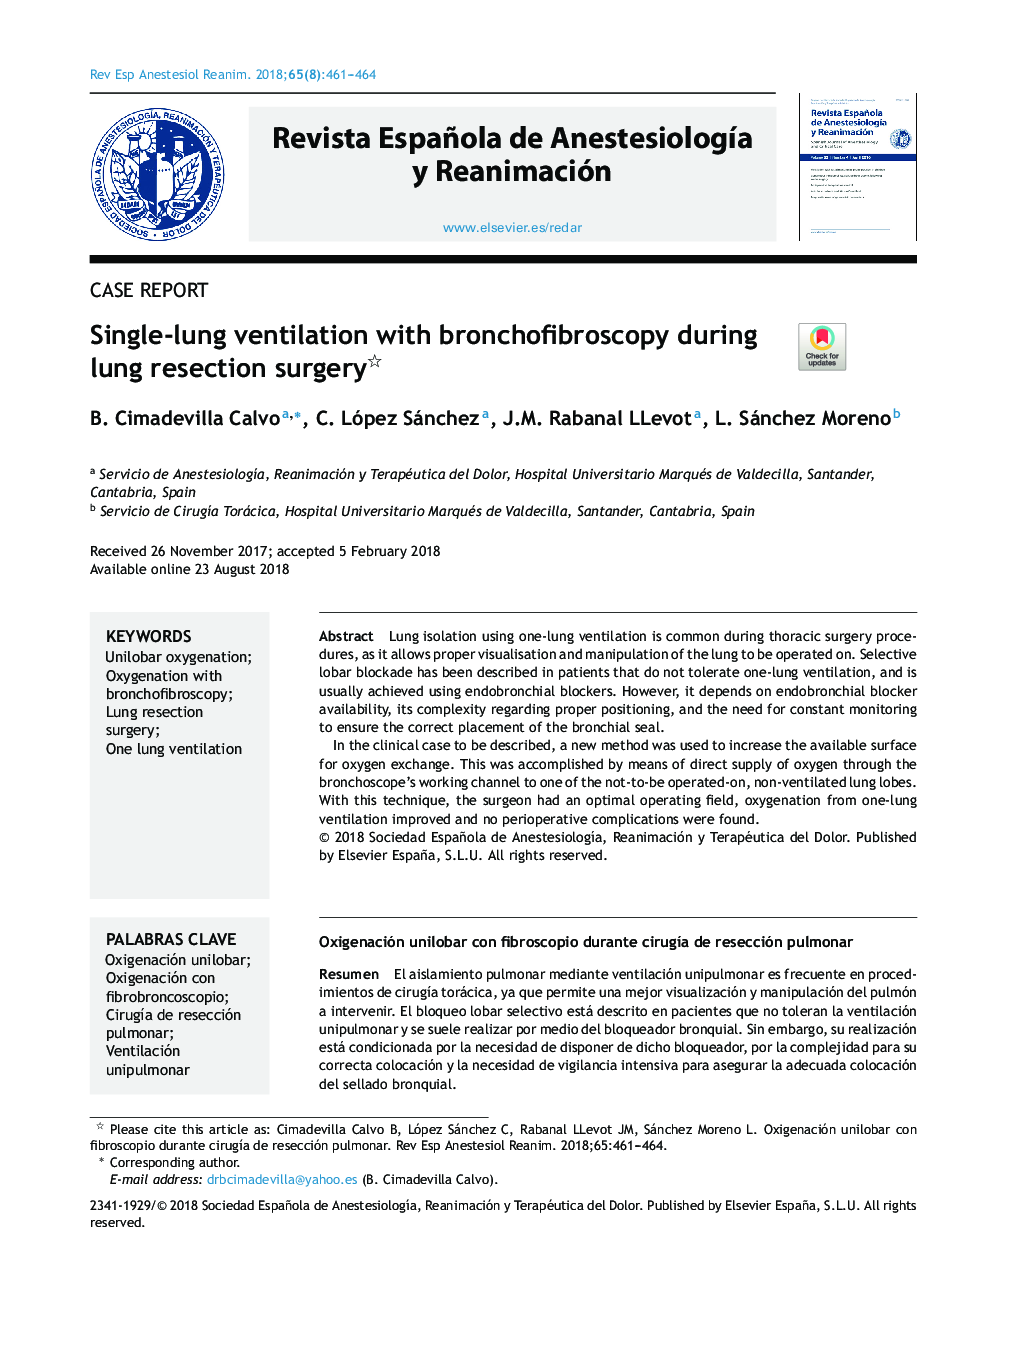 Single-lung ventilation with bronchofibroscopy during lung resection surgery